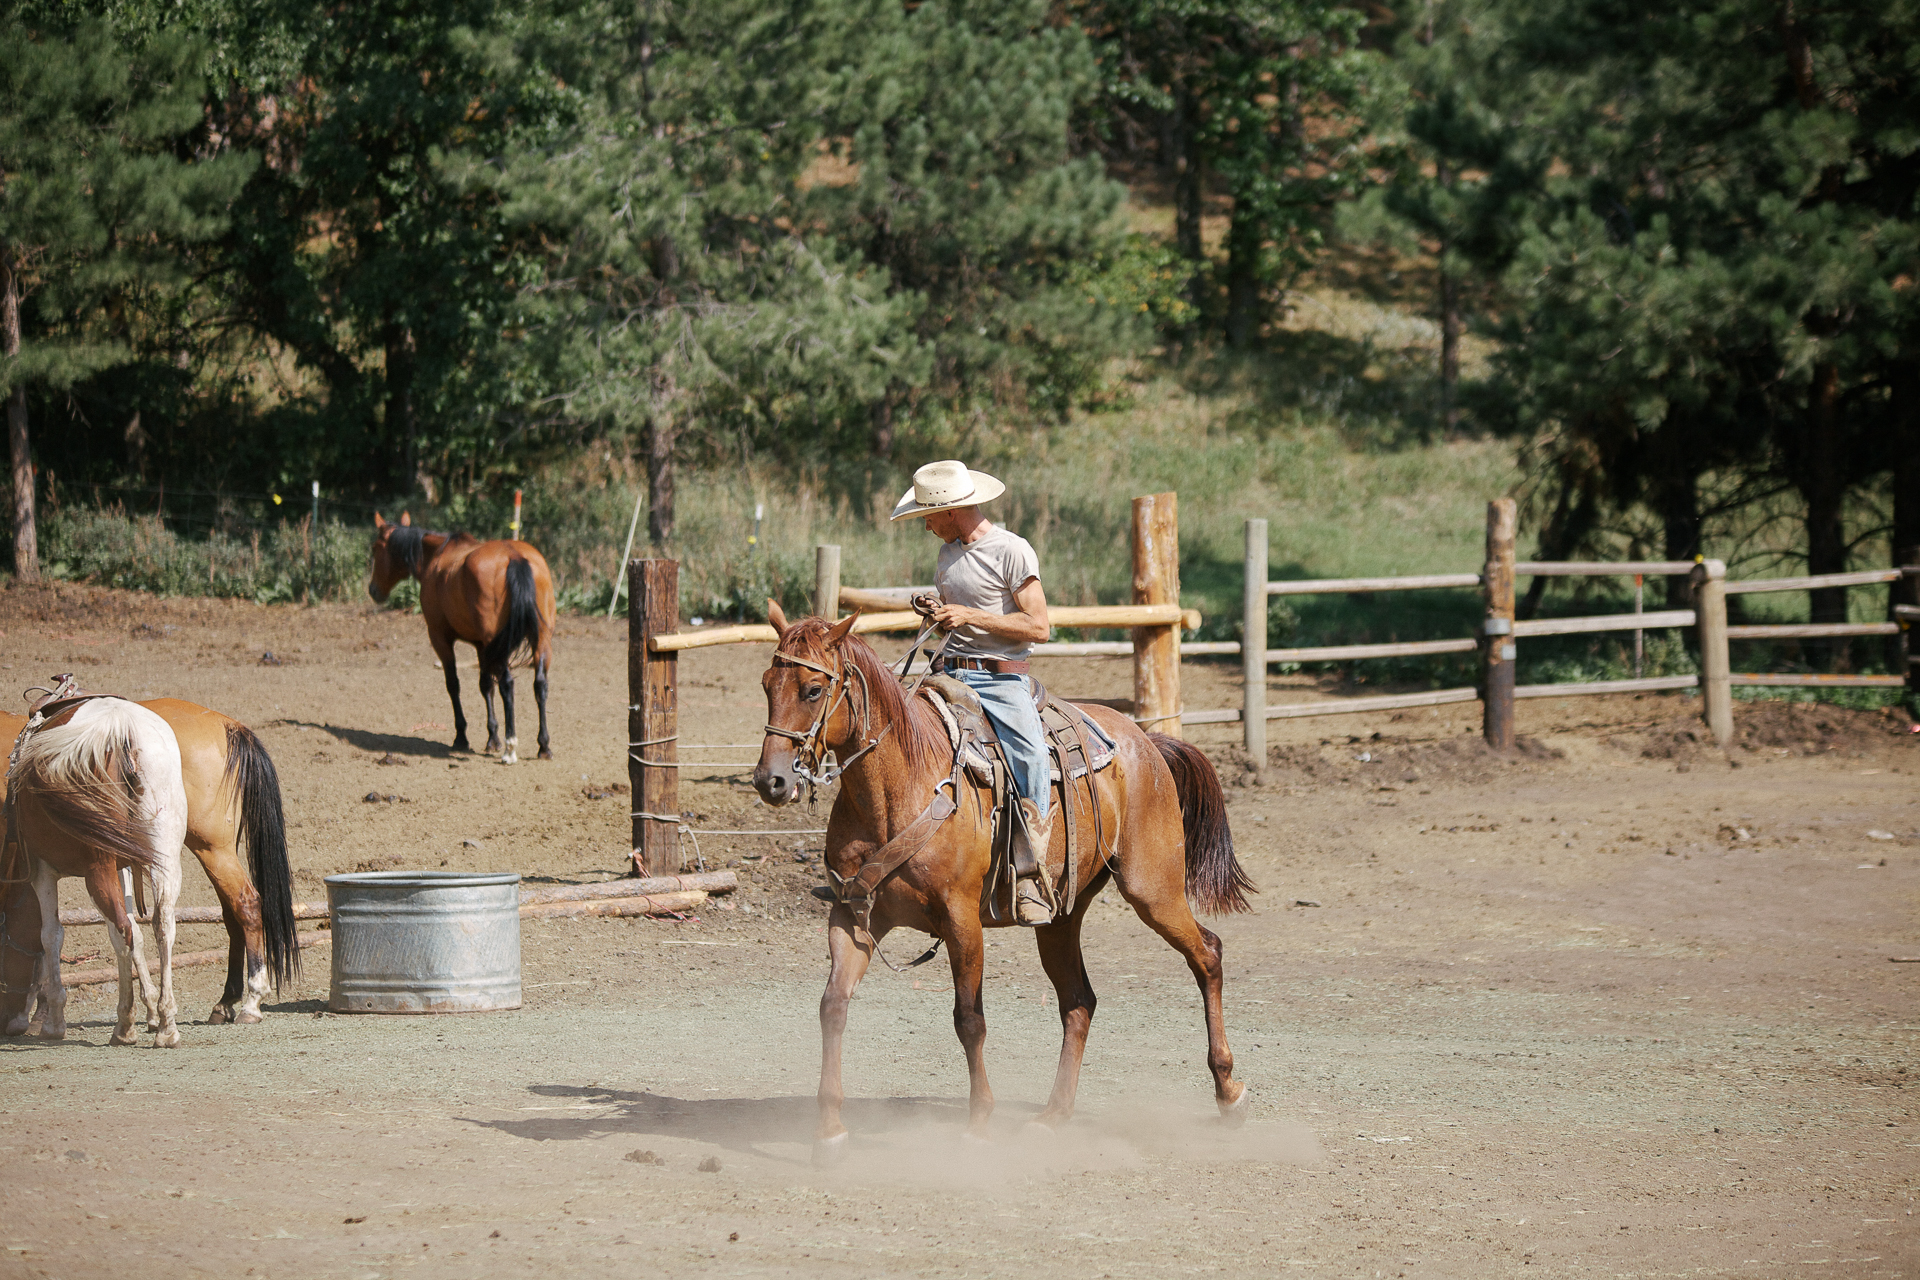 The switchback ranch